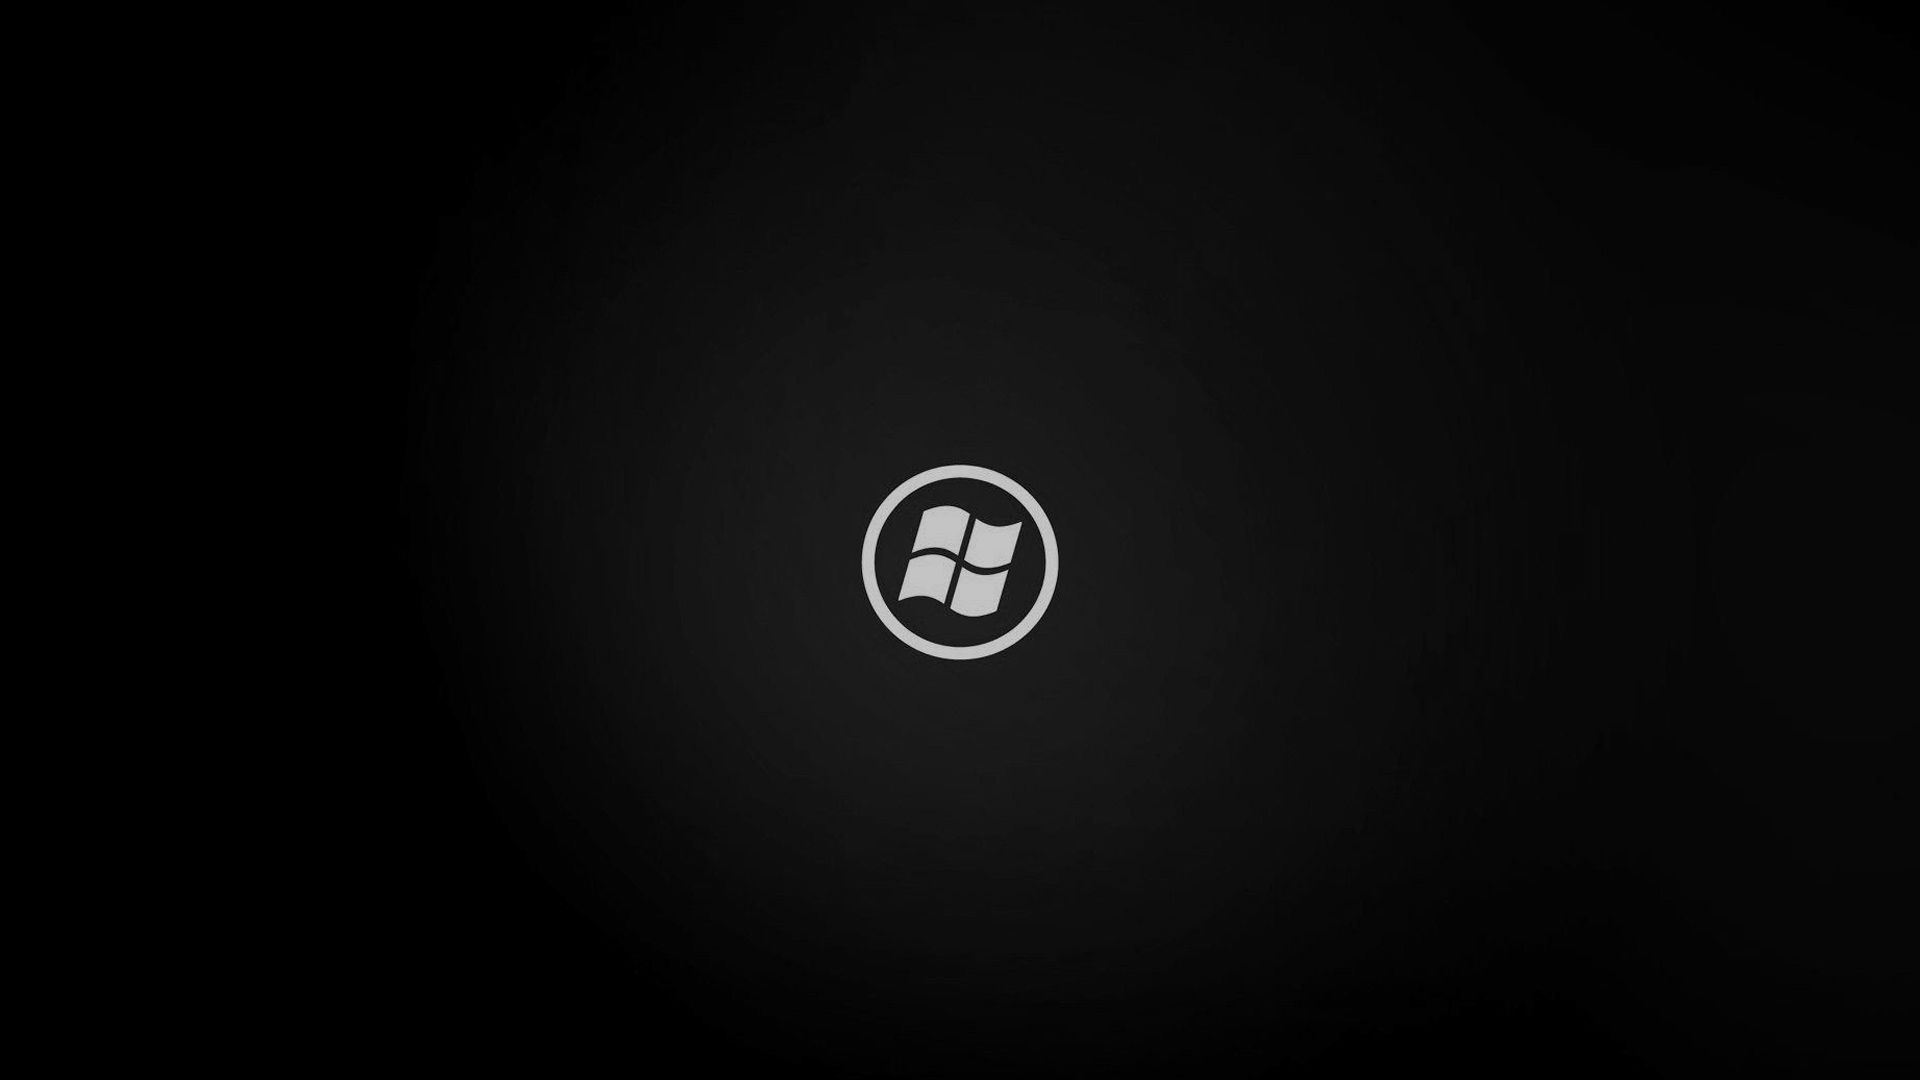 Windows 8 wallpaper, black background, silver logo in the middle - Computer, Windows 10